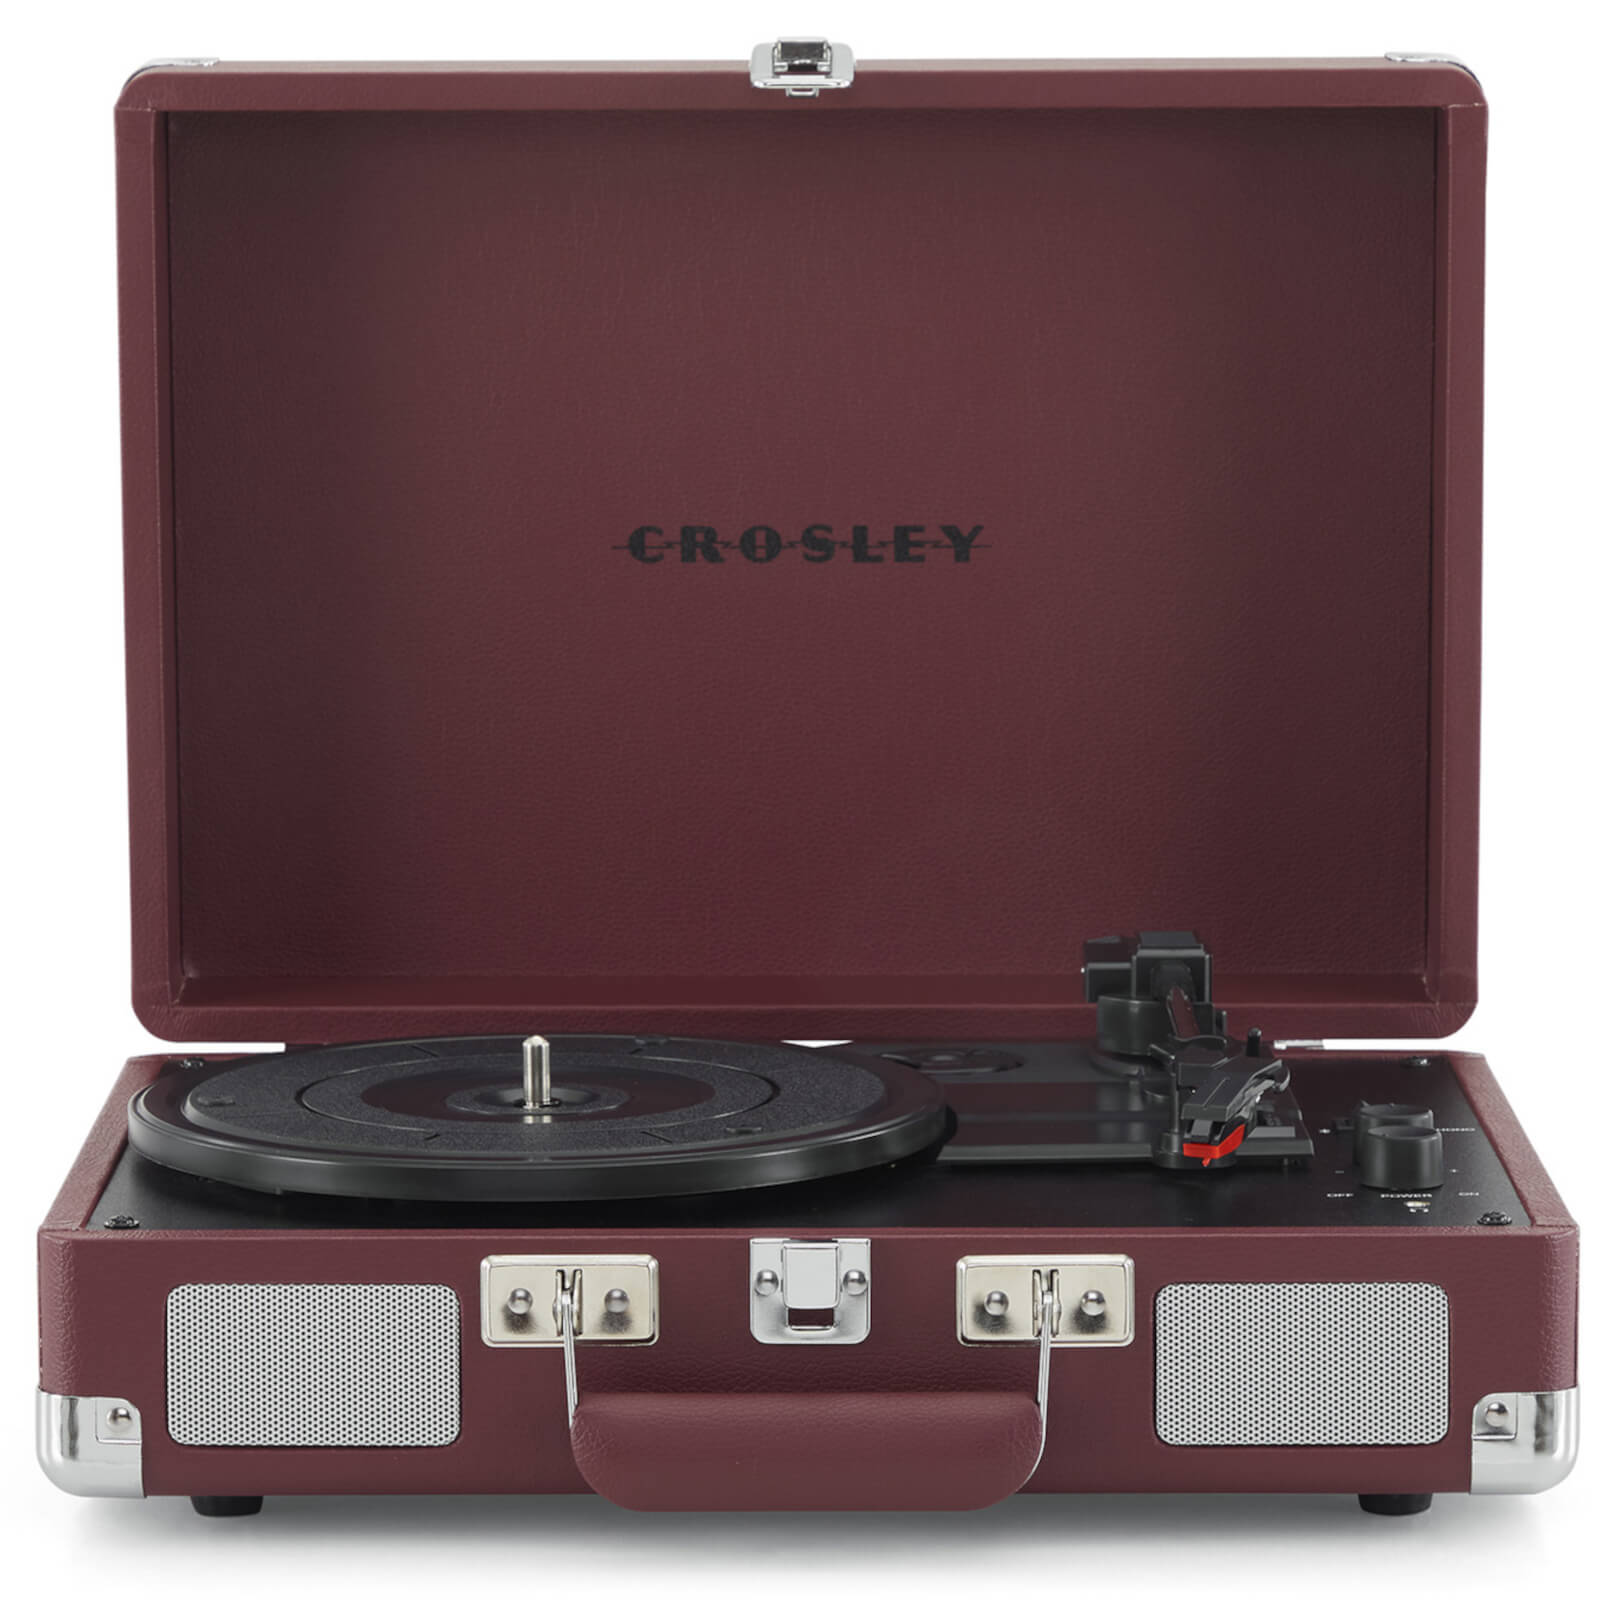 Cruiser Plus Deluxe Portable Turntable - With Bluetooth Output - Burgundy